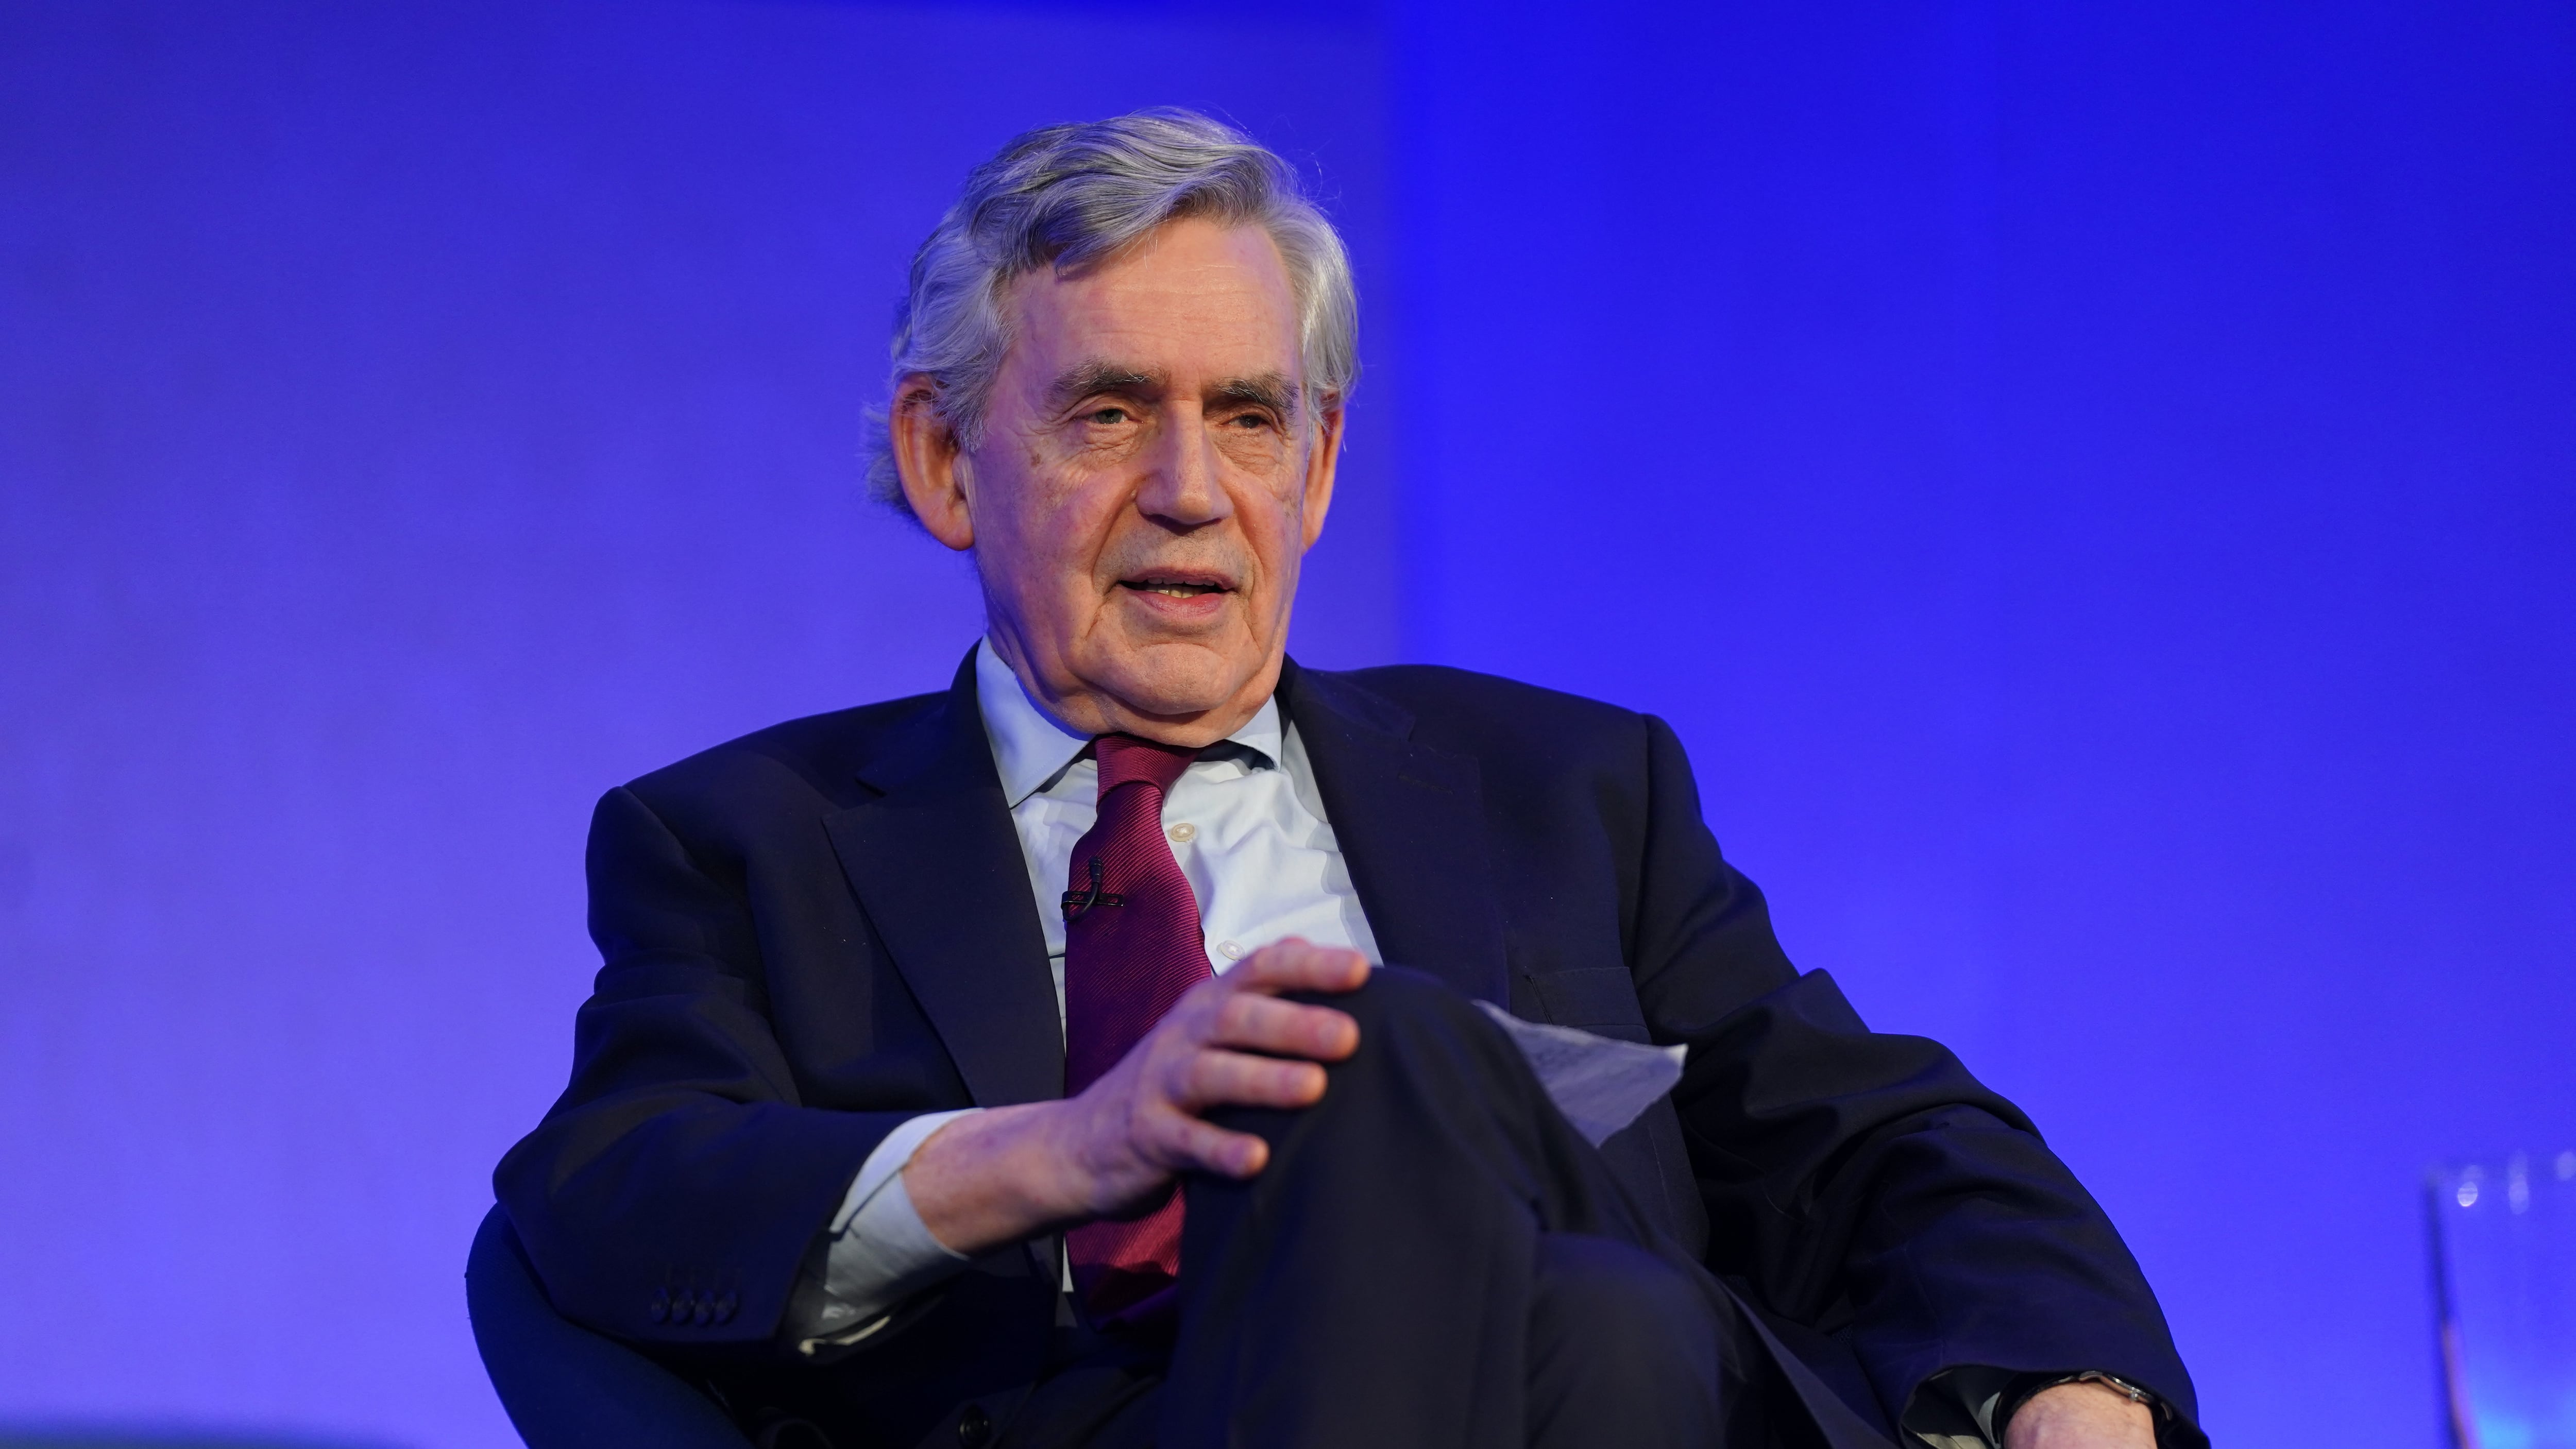 Former prime minister Gordon Brown called for poverty to be tackled